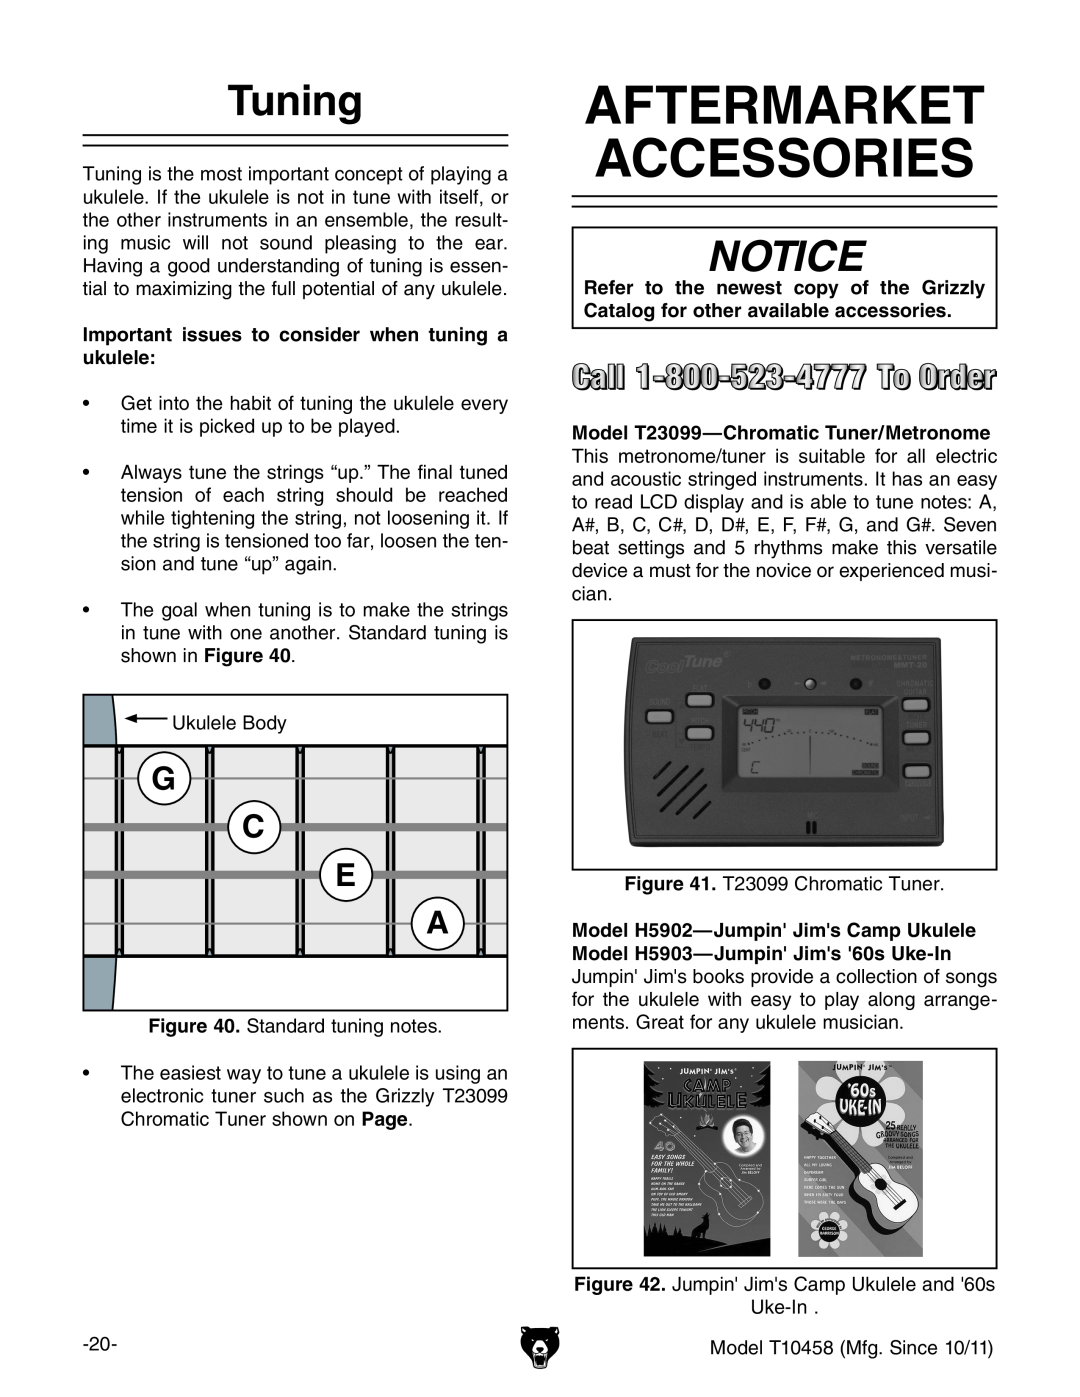 Grizzly T10458 instruction manual Aftermarket Accessories, Tuning, Important issues to consider when tuning a ukulele 